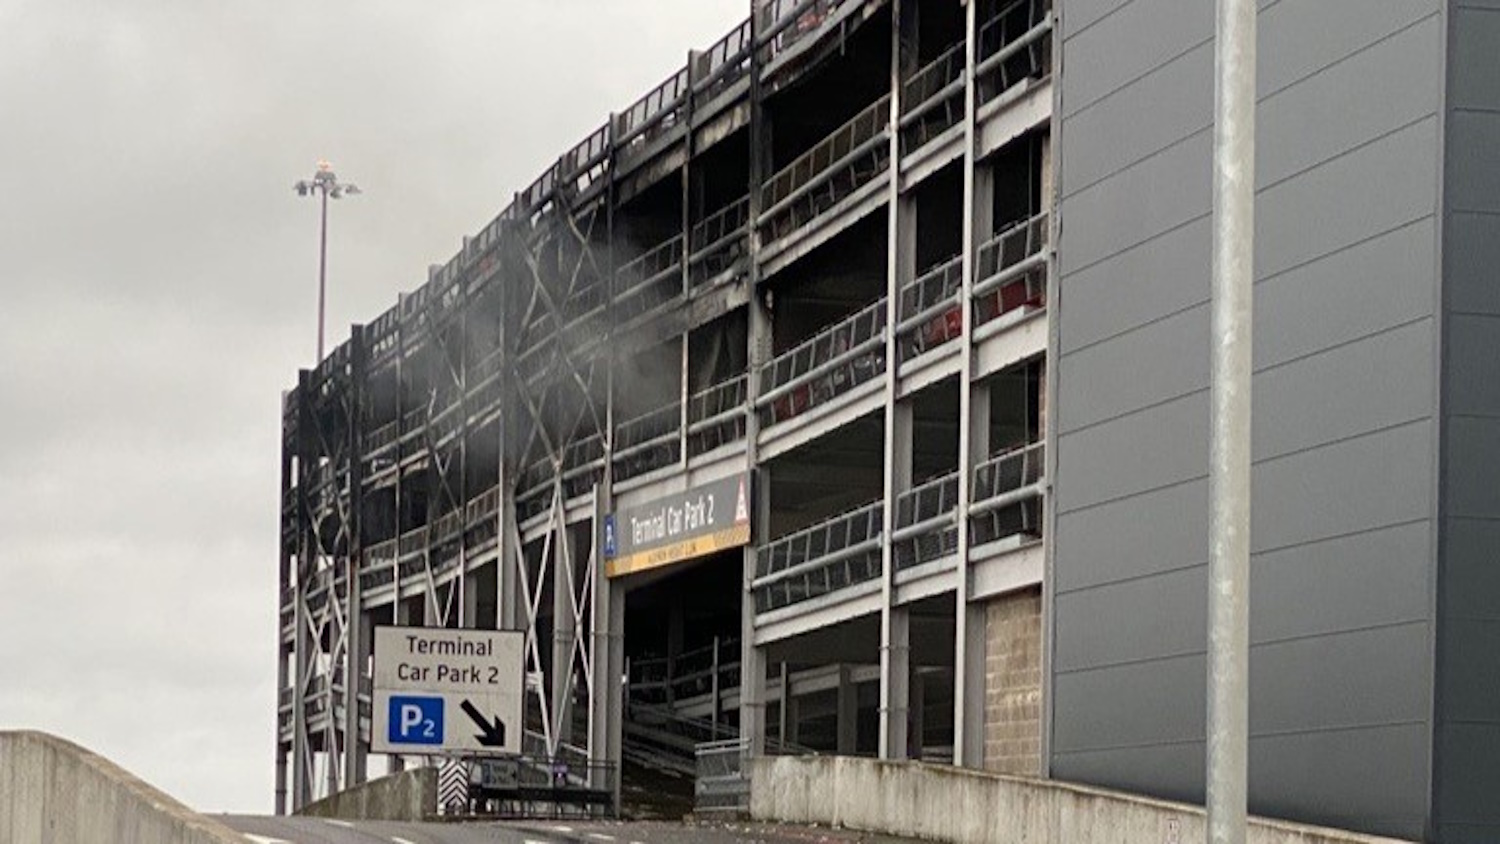 Aftermath of the Luton Airport car park fire (image: Bedfordshire Fire and Rescue Service)